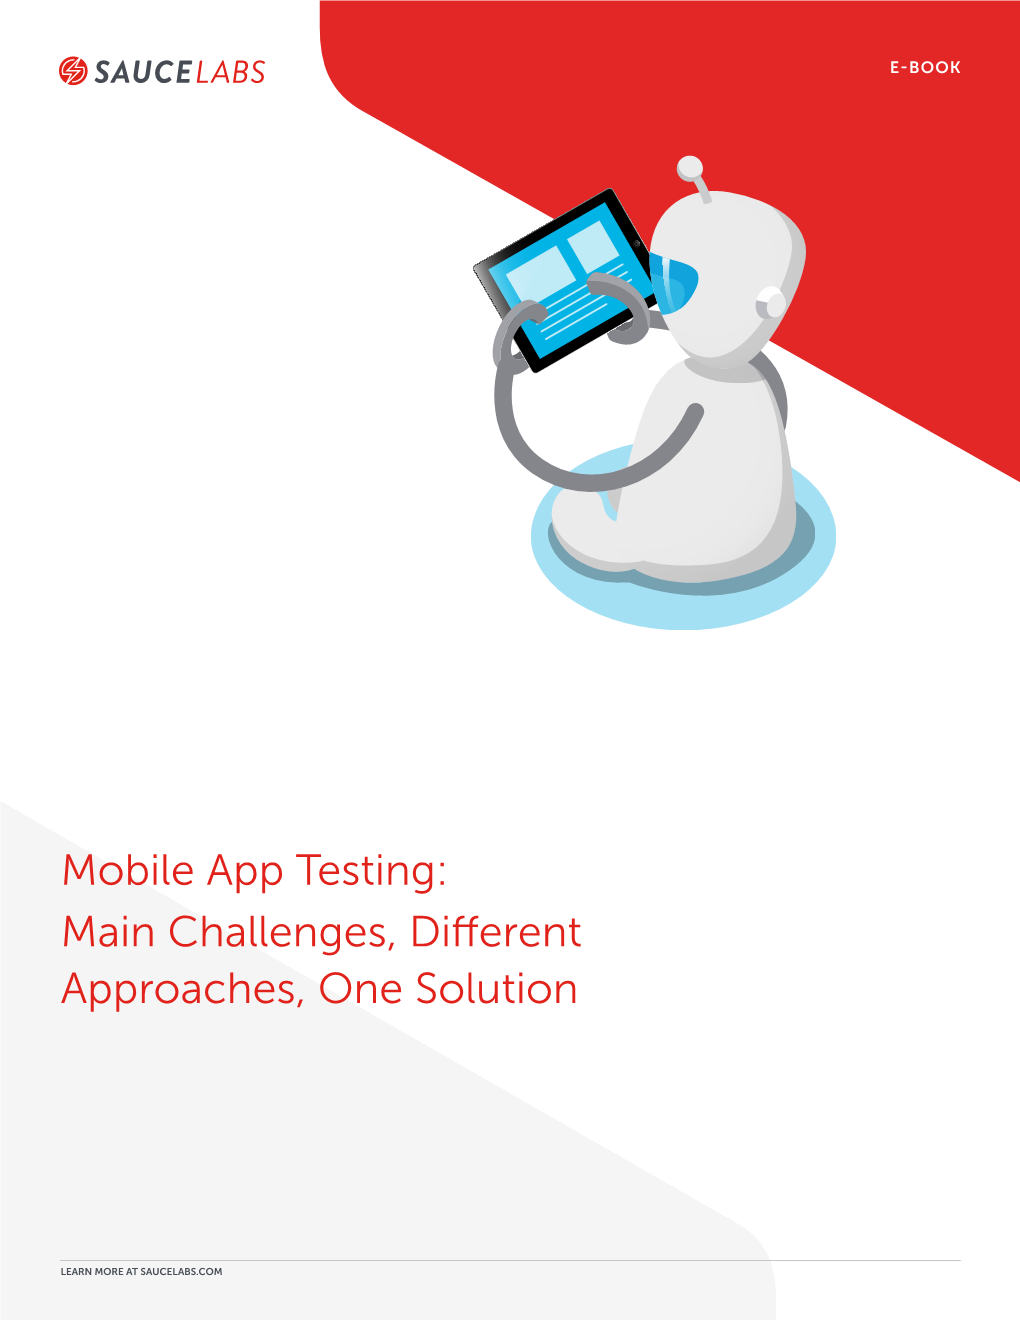 Mobile App Testing: Main Challenges, Different Approaches, One Solution